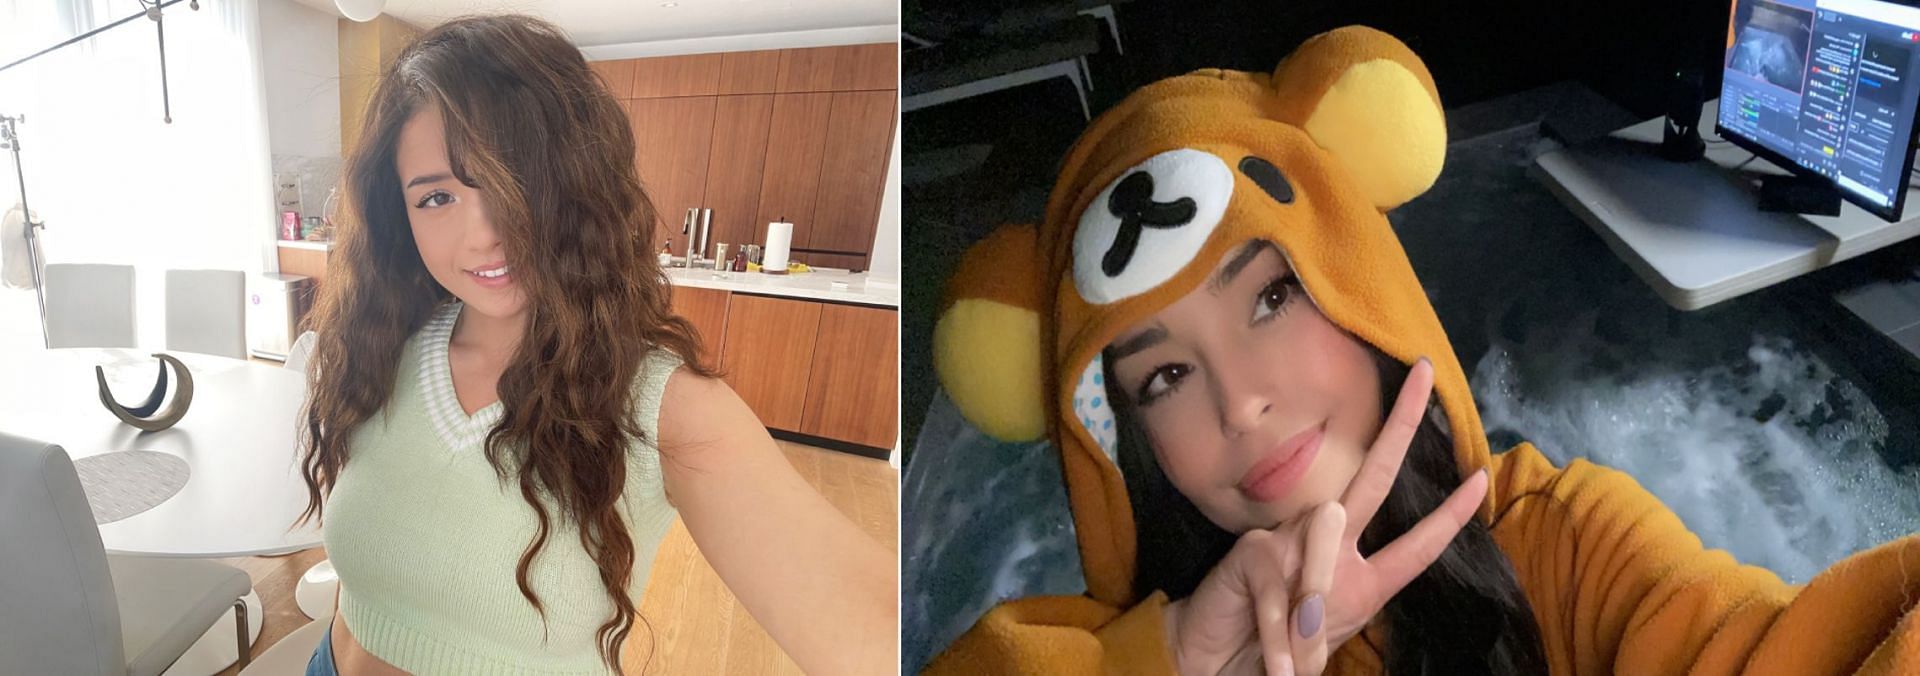 Valkyrae is shocked by the amount of unban requests Pokimane piled up (Images via Twitter/Pokimane and Twitter/Valkyrae)